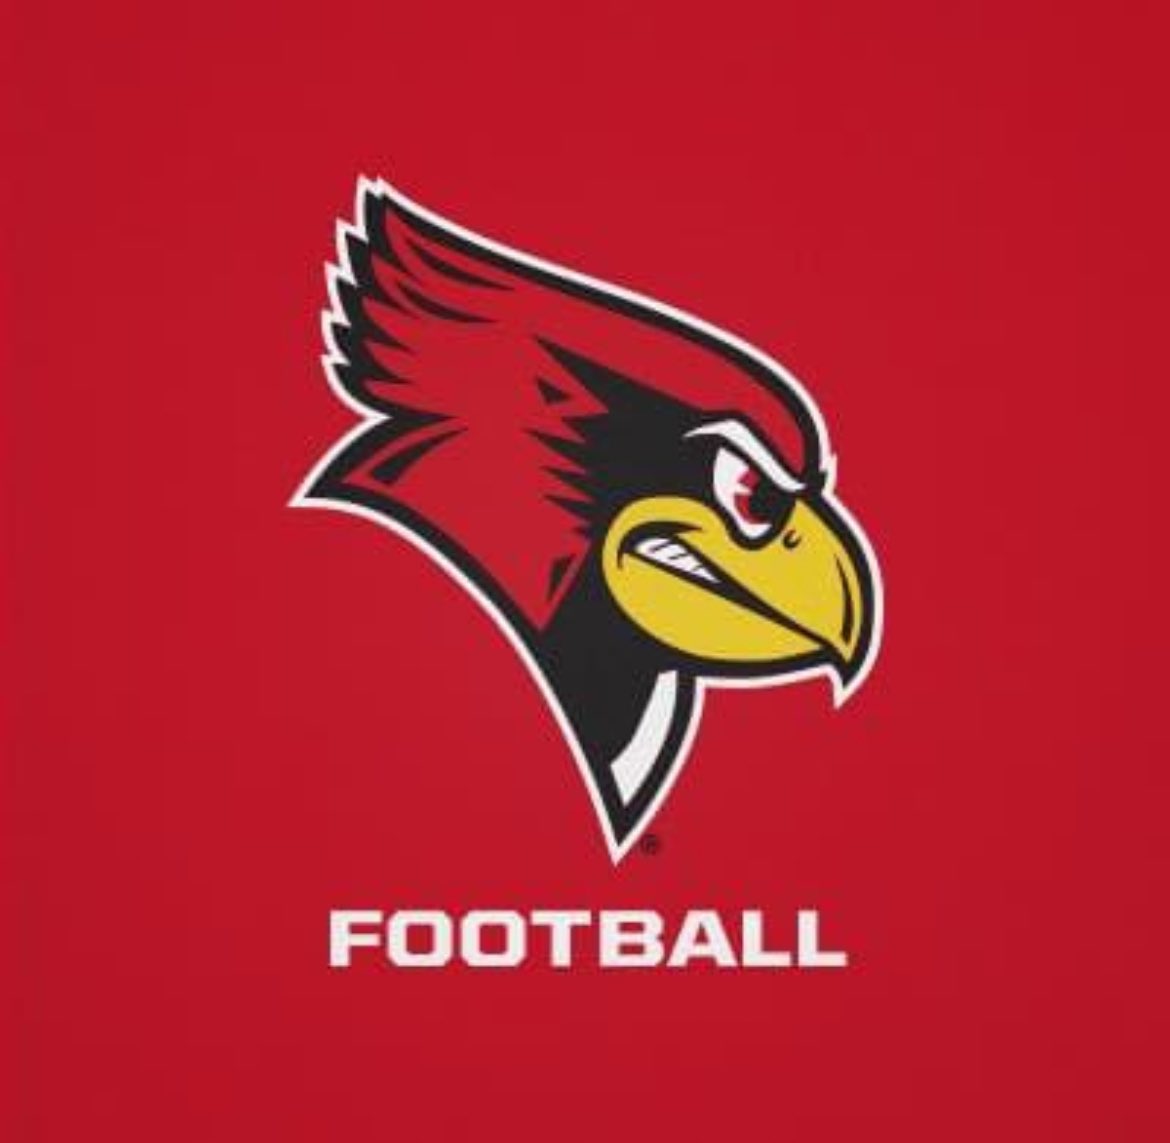 #AGTG After a great conversation with @CoachTevv am truly blessed to receive a D1 offer from @RedbirdFB!!! @CoachBeck_PTF @SmileHeardJ @coachcilumba @TonyPetersen17 #BlameitonGod